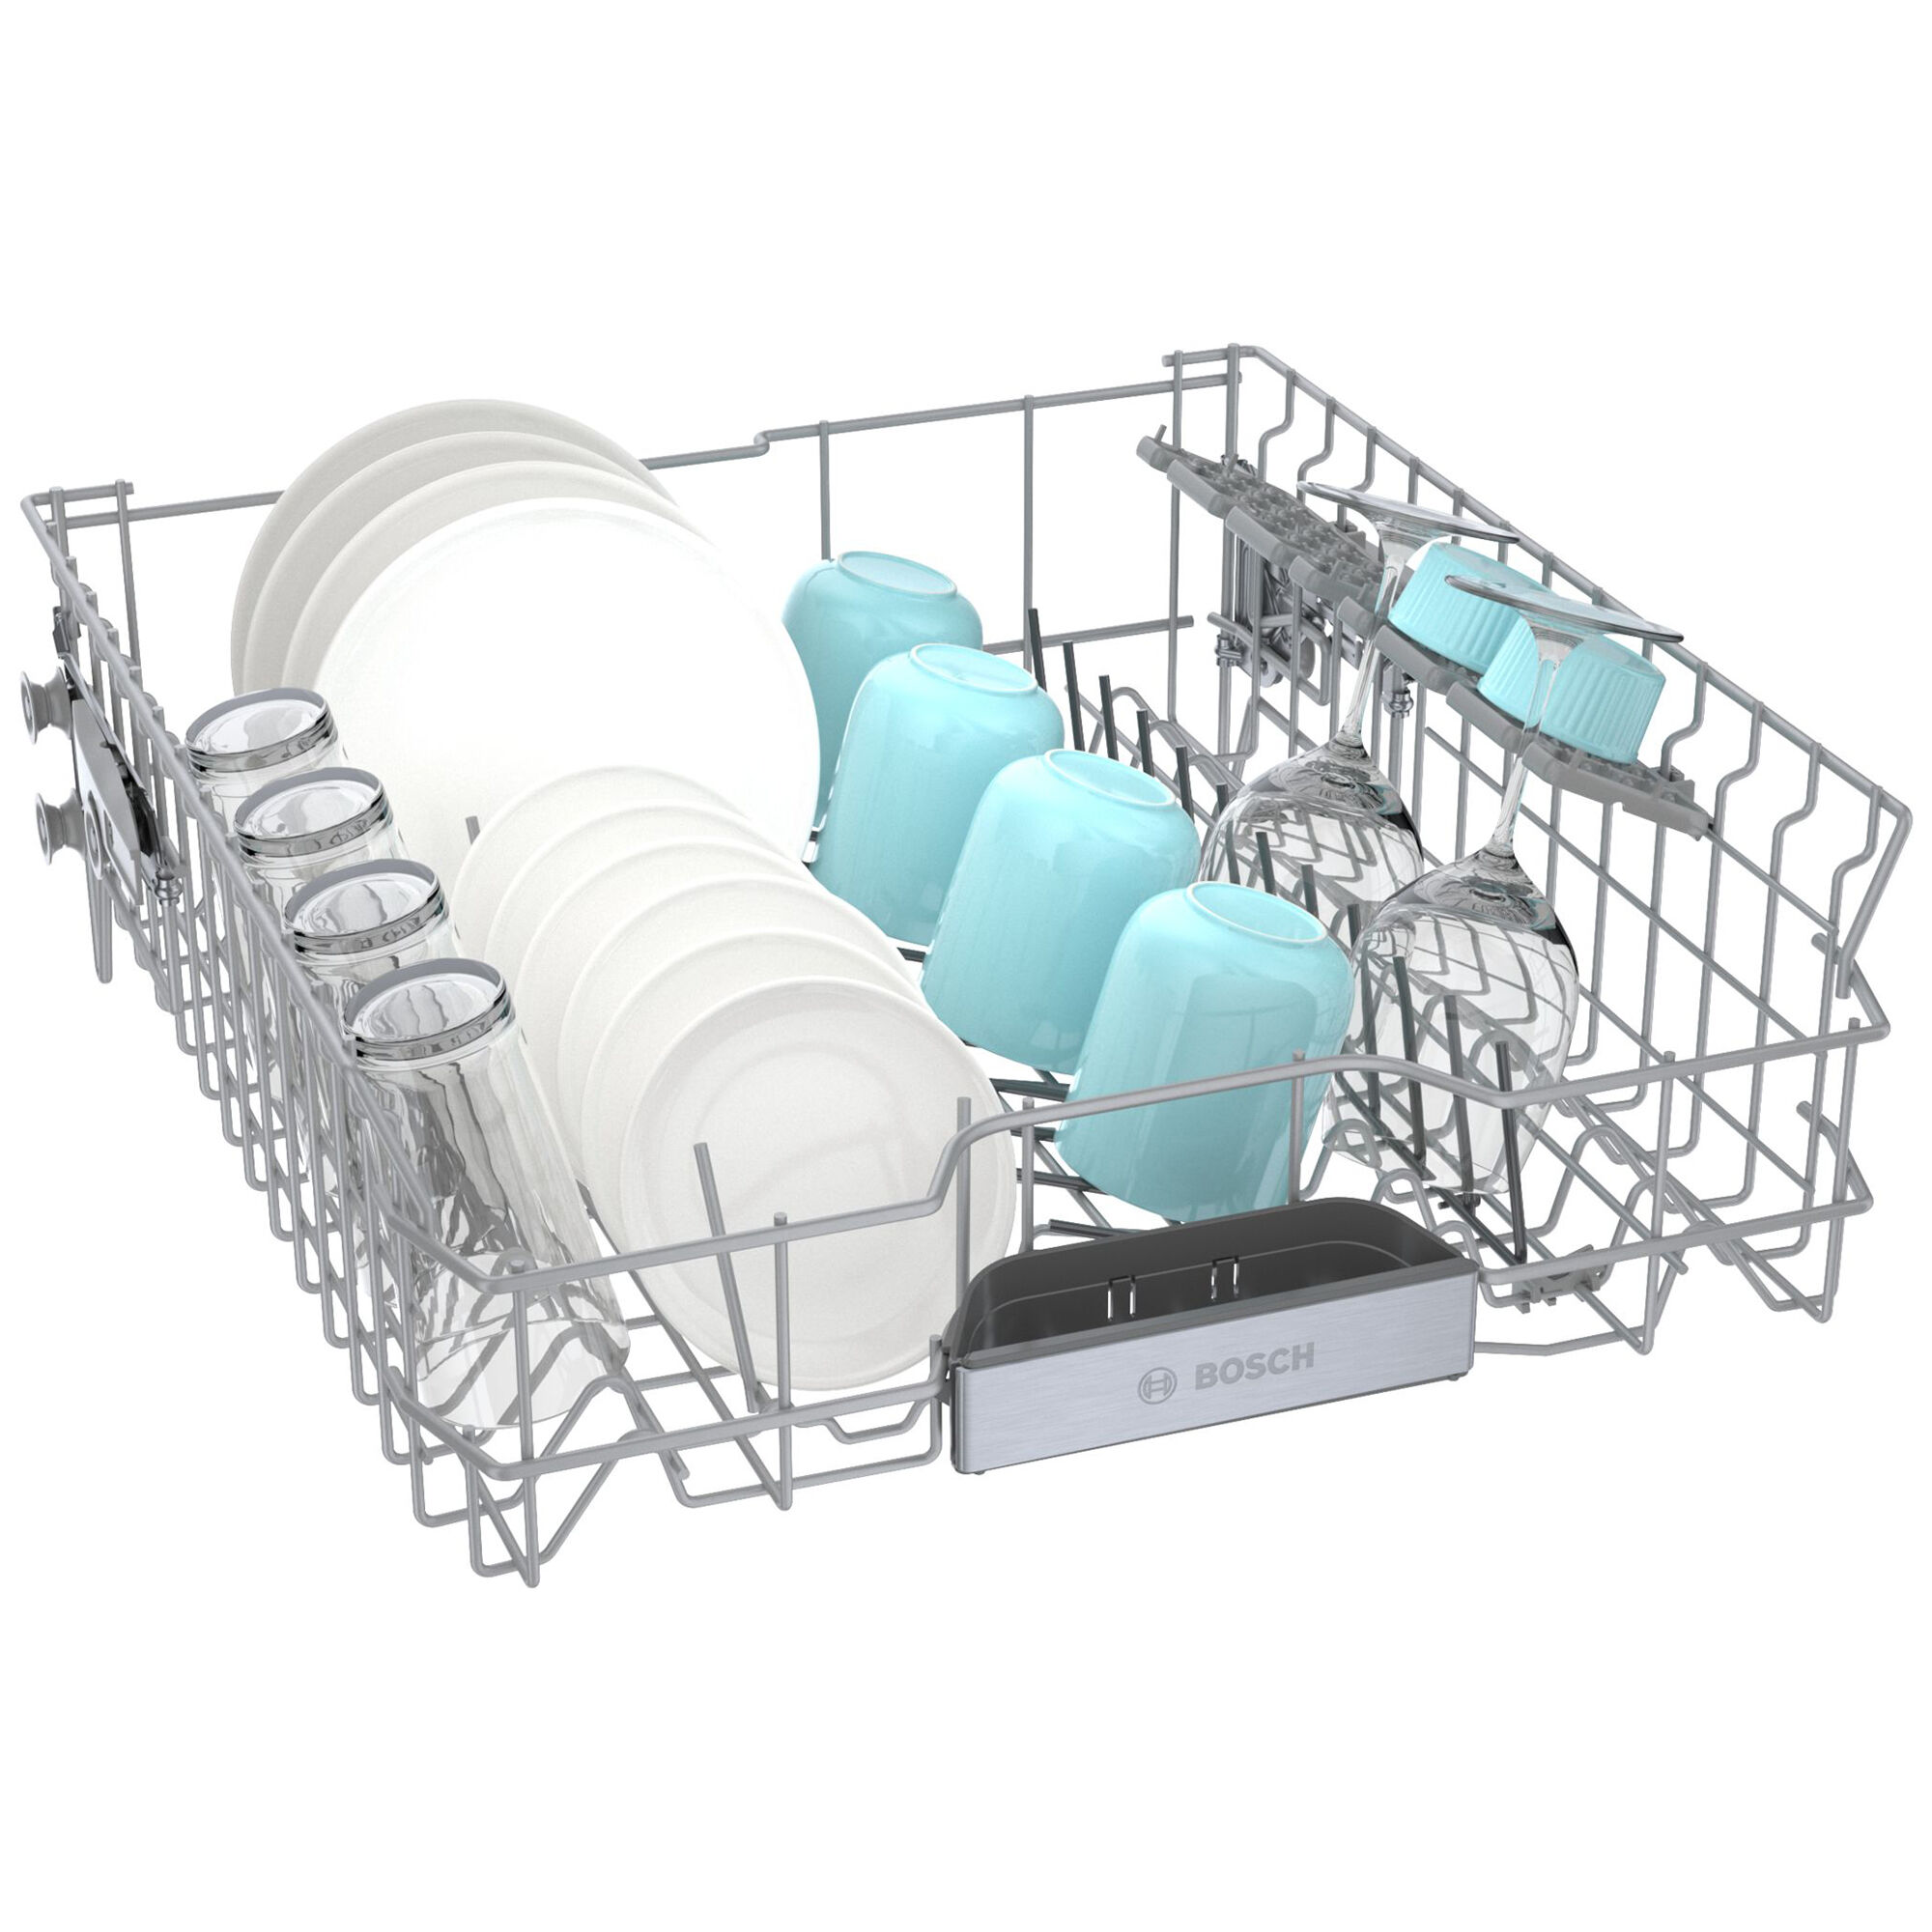 Bosch 500 Series 24 in. Smart Built-In Dishwasher with Top Control 